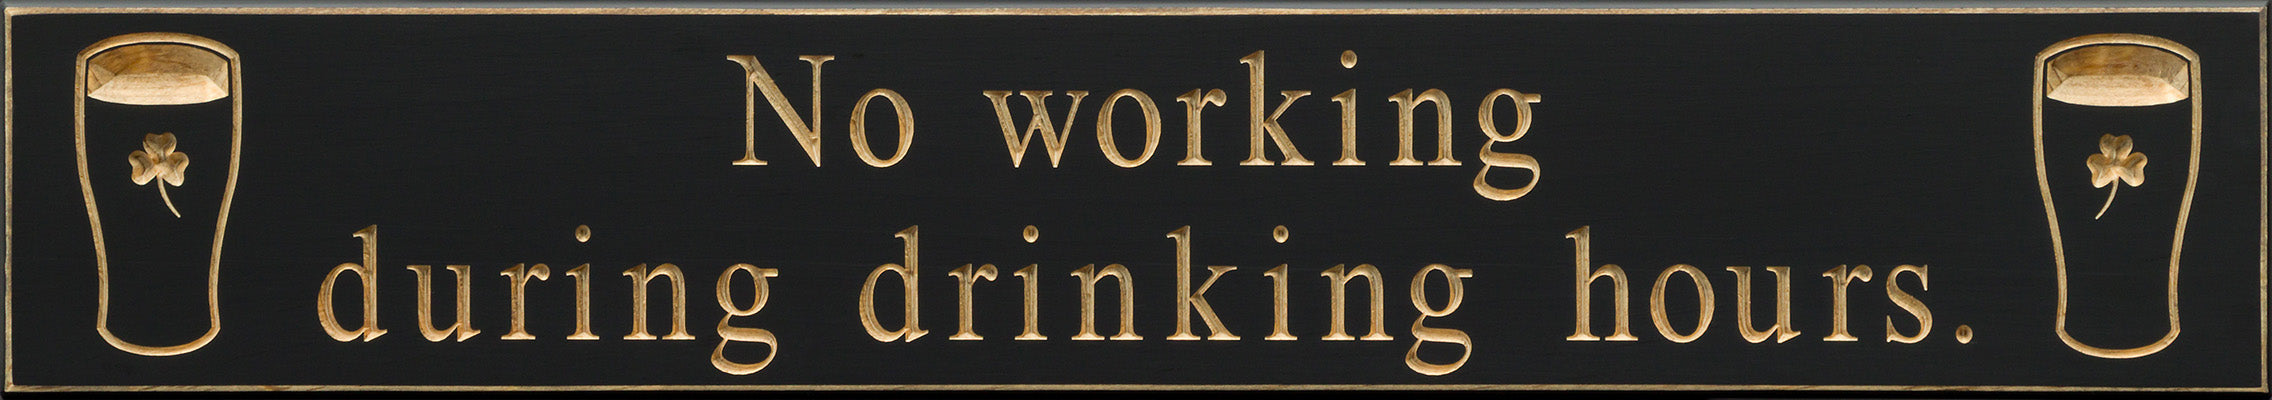 No working during drinking hours …